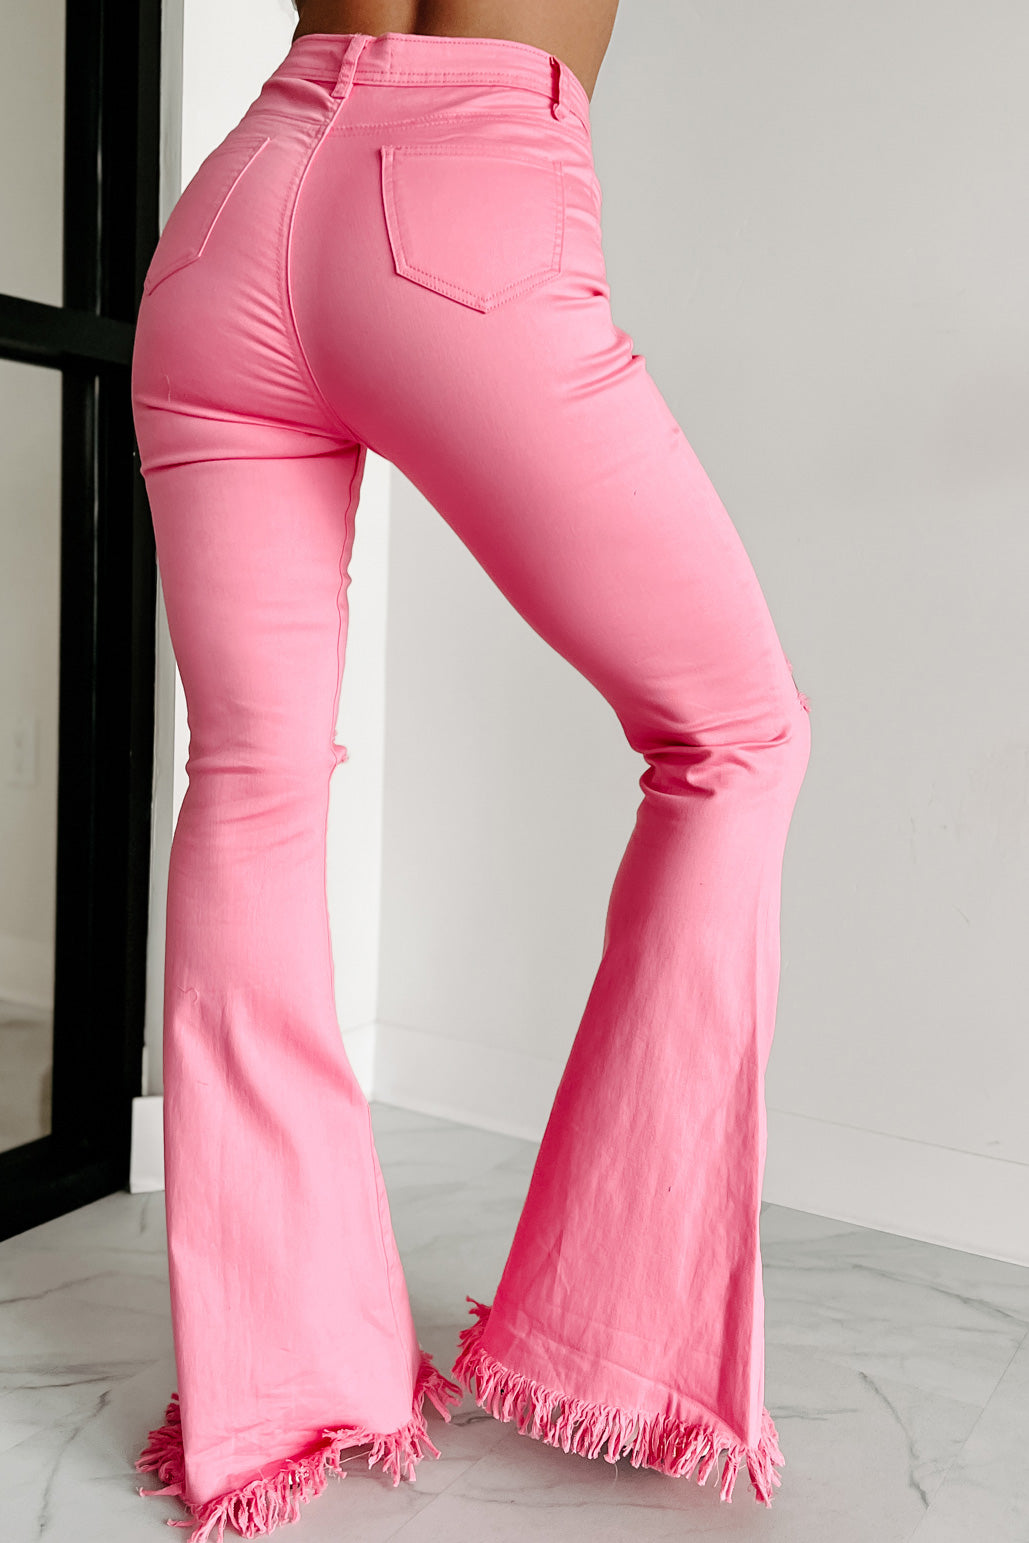 Doorbuster Bold Moves High Rise Distressed Flare Jeans (Pink) - NanaMacs